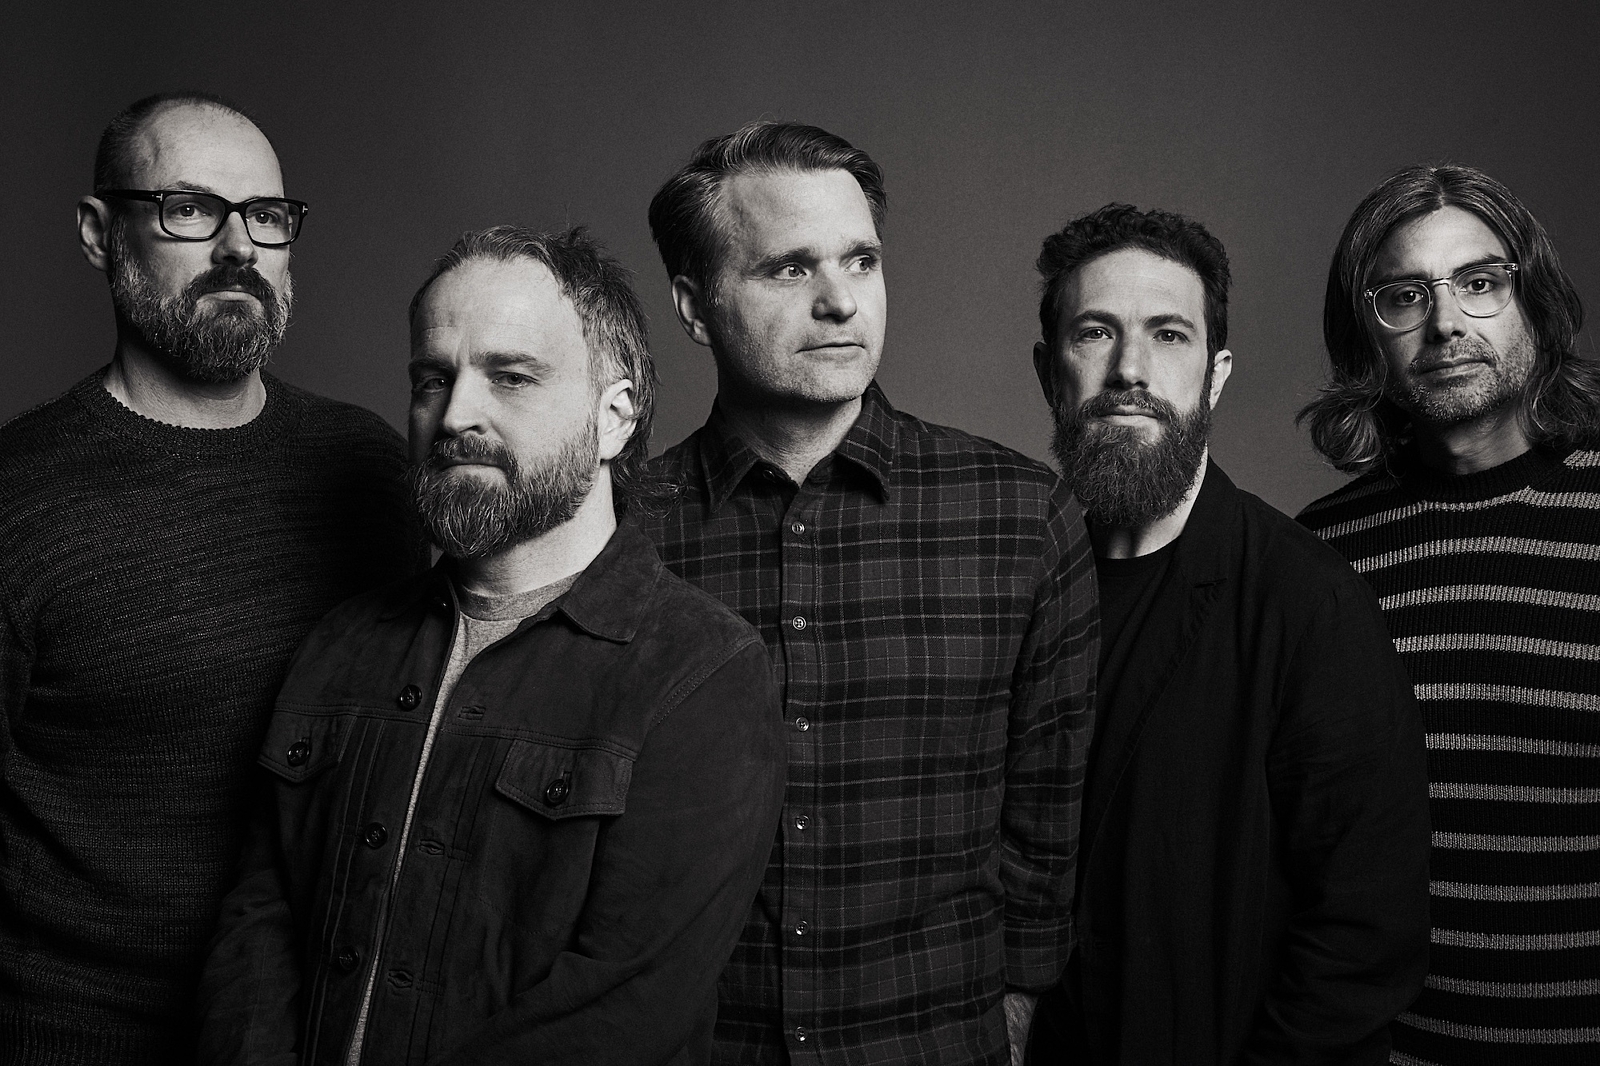 Death Cab For Cutie: "I want us to be the best version of what we are"